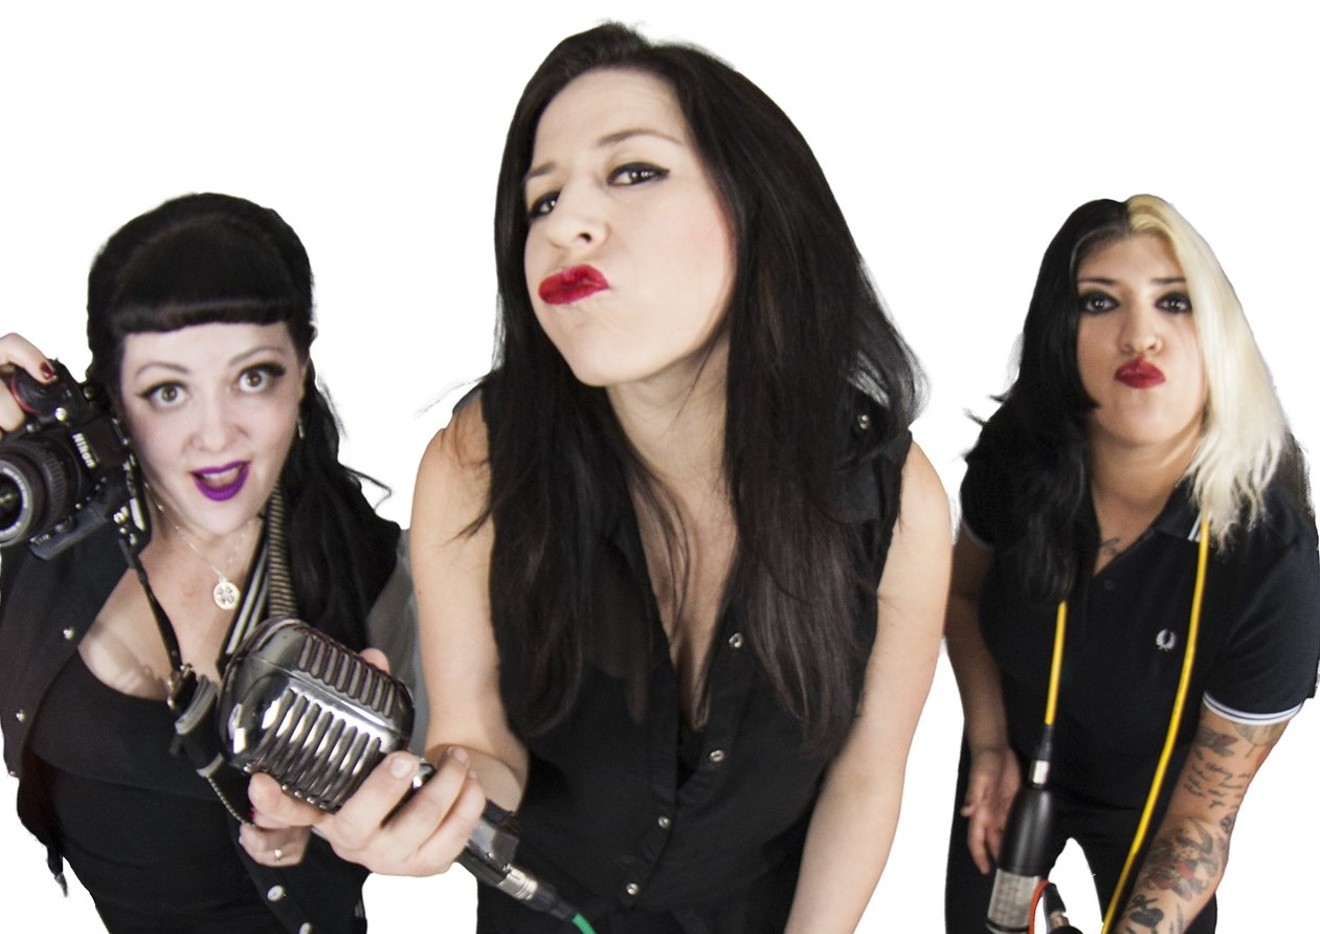 From left, Angela RoseRed, Drea Doll, and Gaby Kaos are the Sound Sisters